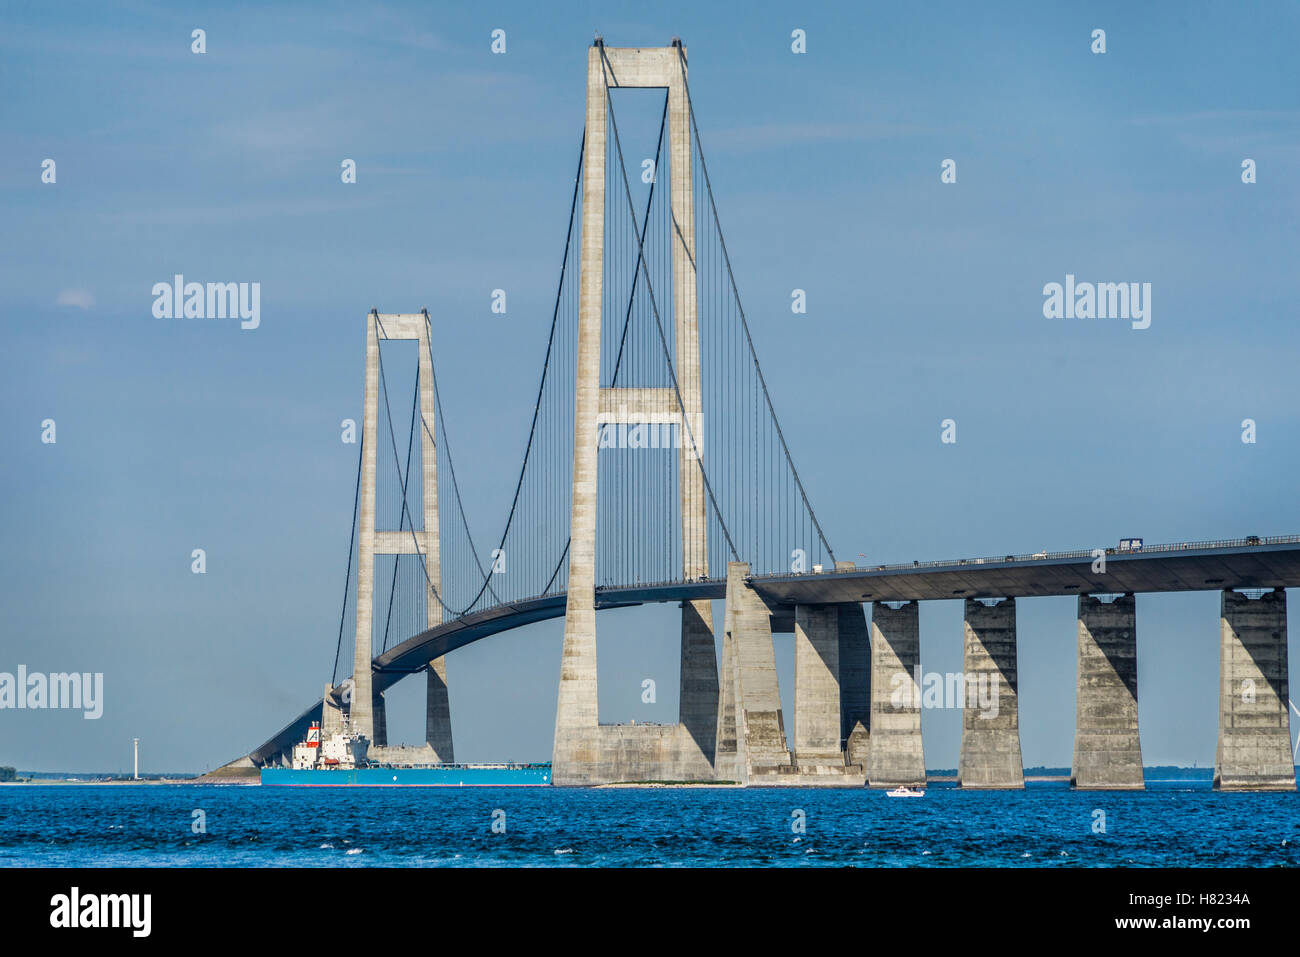 Denmark, Great Belt Bridge, connecting the islands of Funen and Zealand across the Great Belt, the suspension and box girder bri Stock Photo